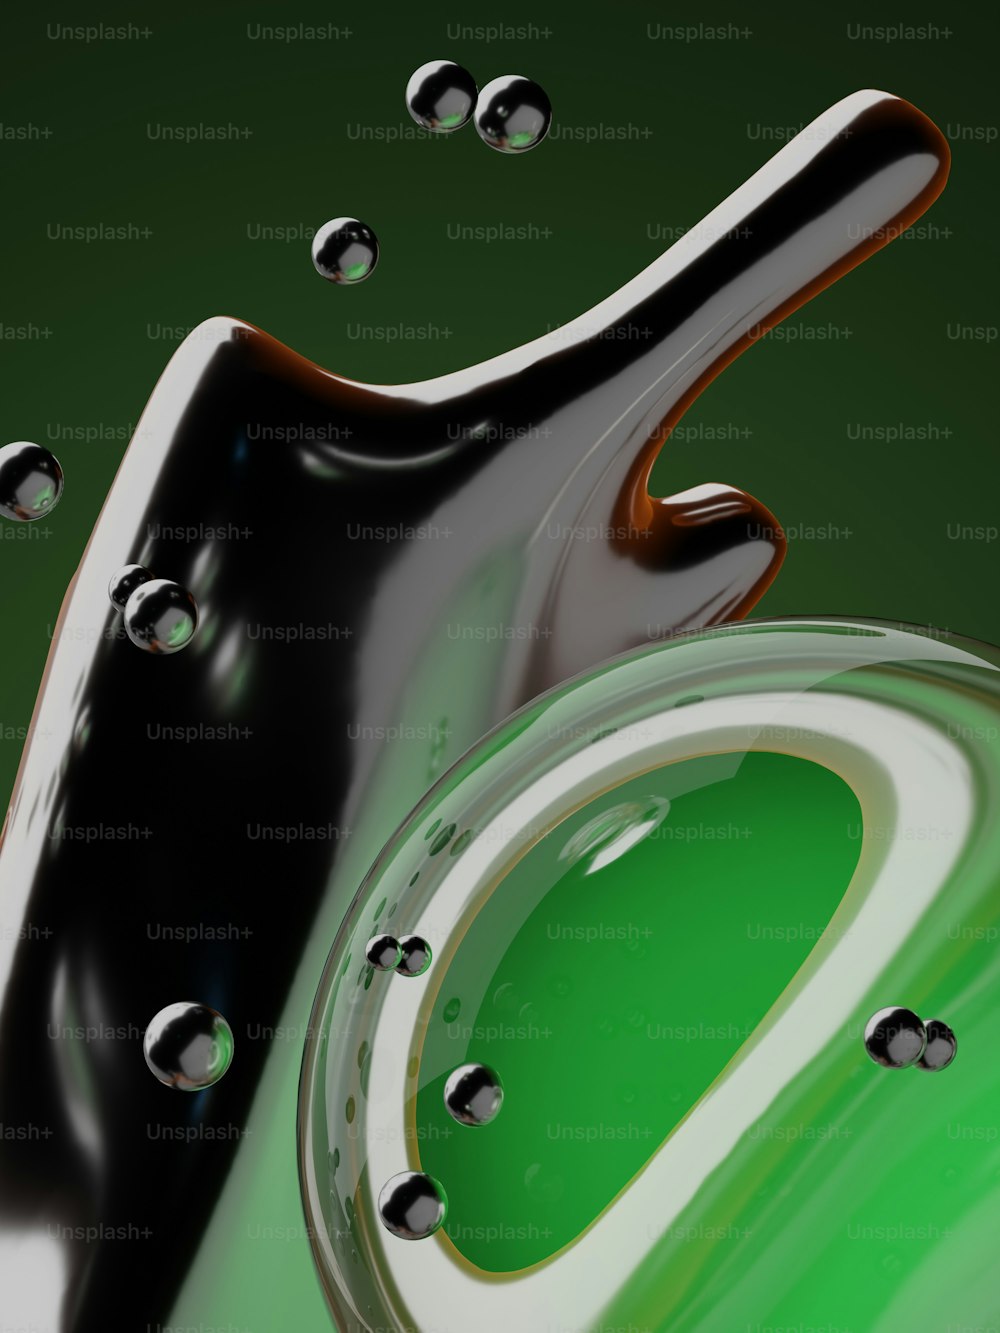 a close up of a green and black object